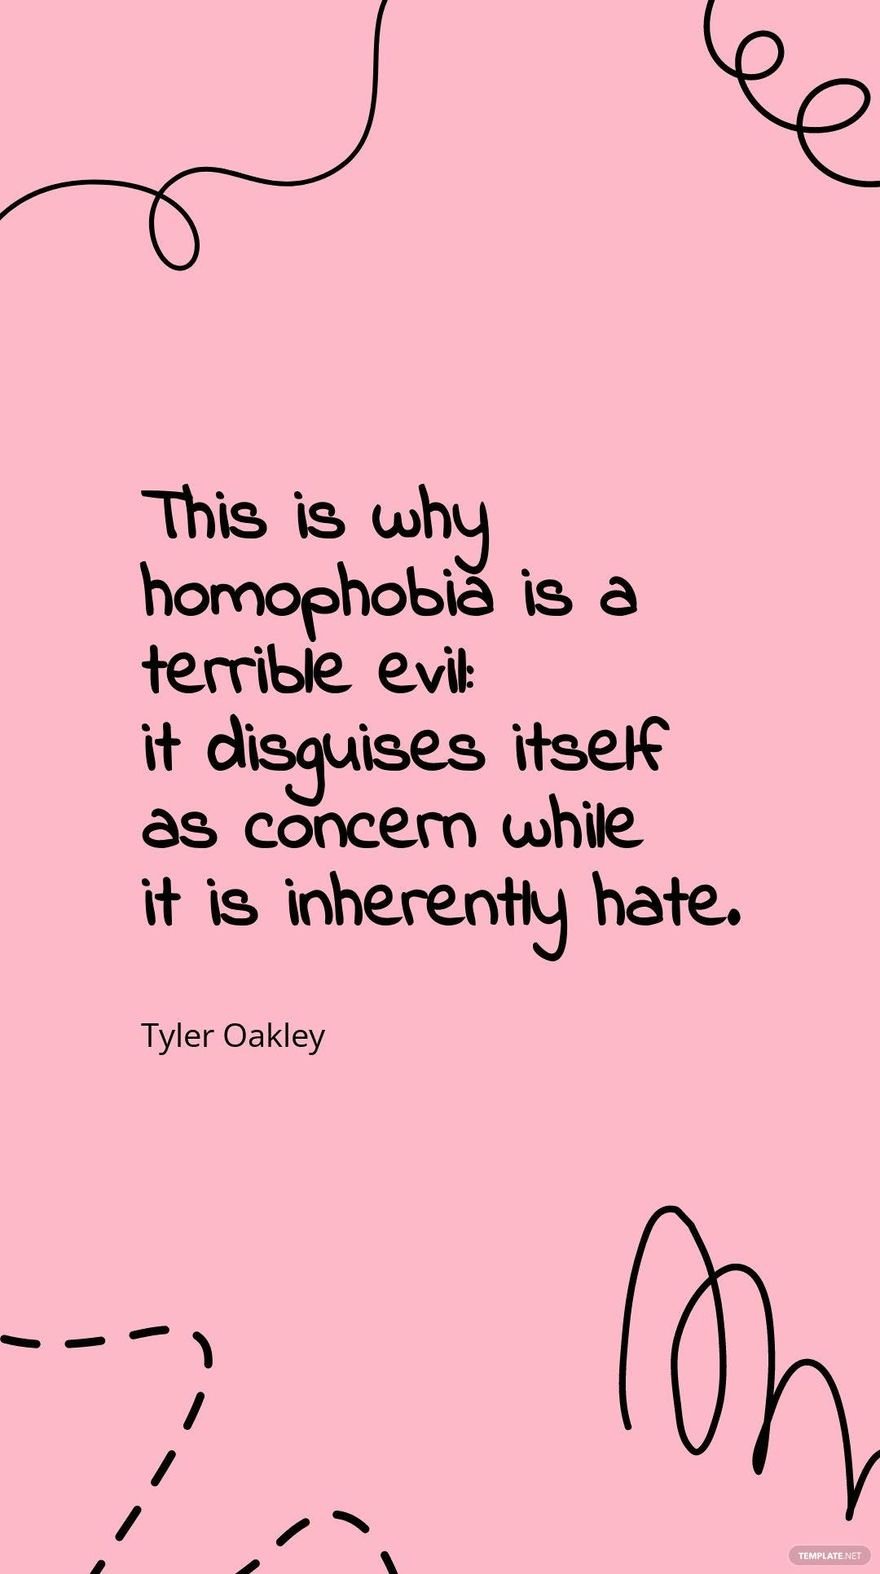 Free Tyler Oakley - This is why homophobia is a terrible evil: it disguises itself as concern while it is inherently hate.